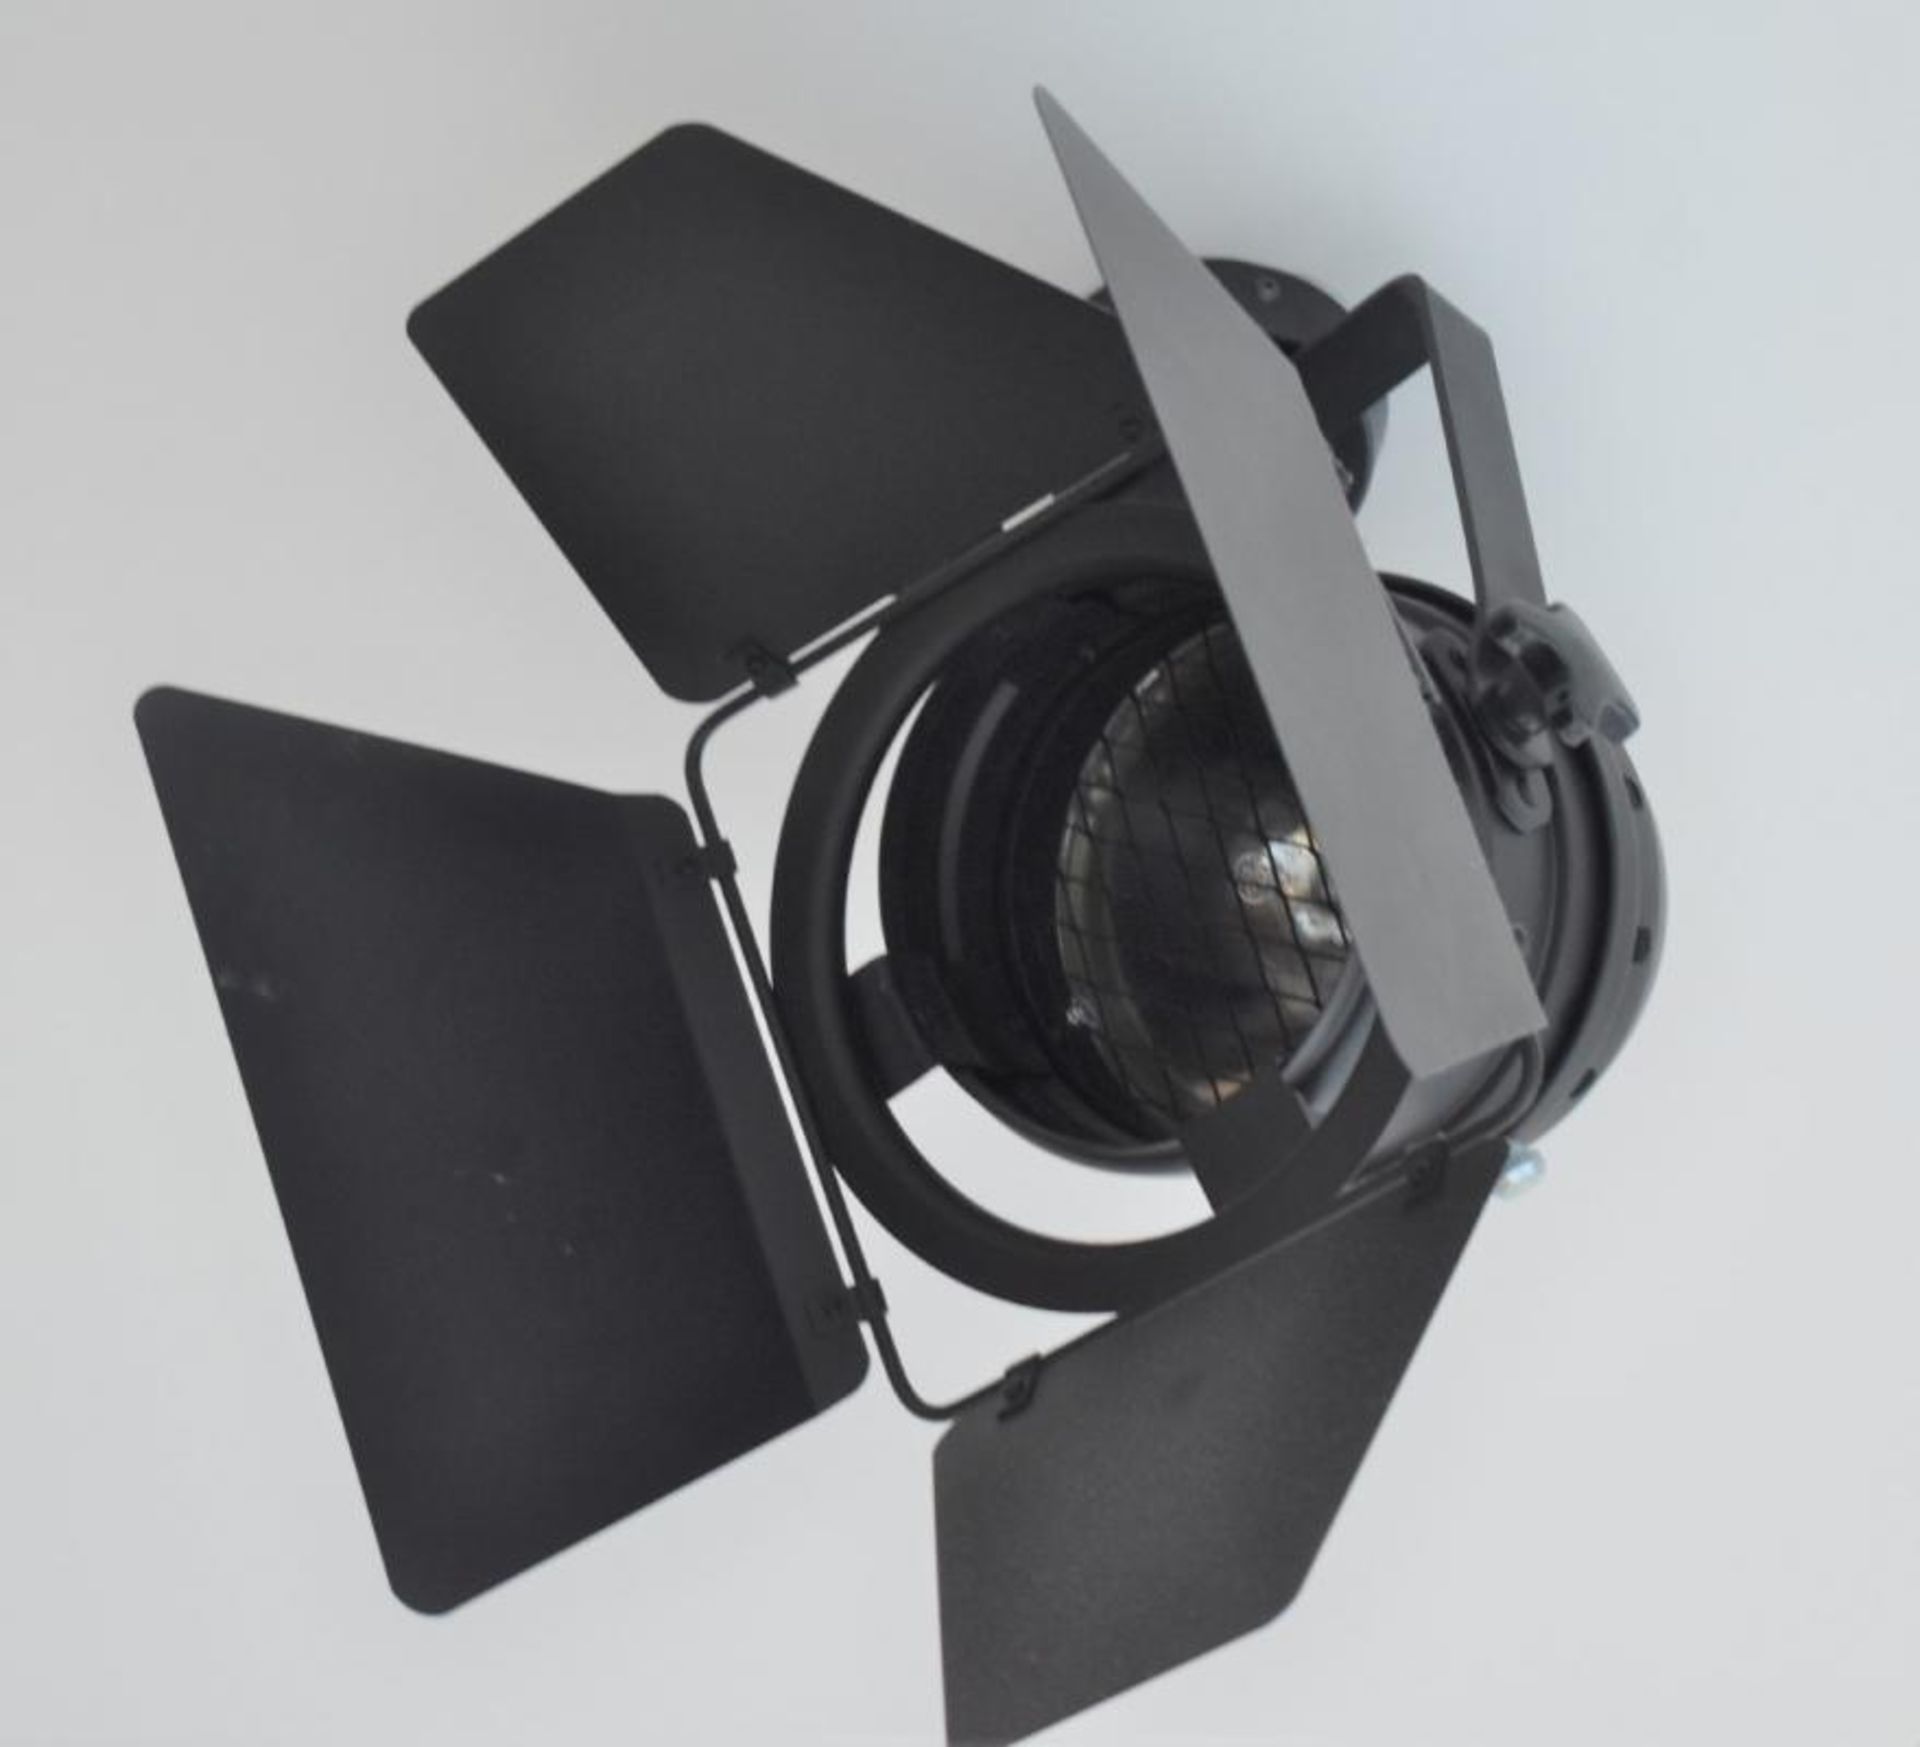 4 x Ceiling Mounted Disco / Stage Lights - CL489 - Location: Putney, London, SW15 Auction details: